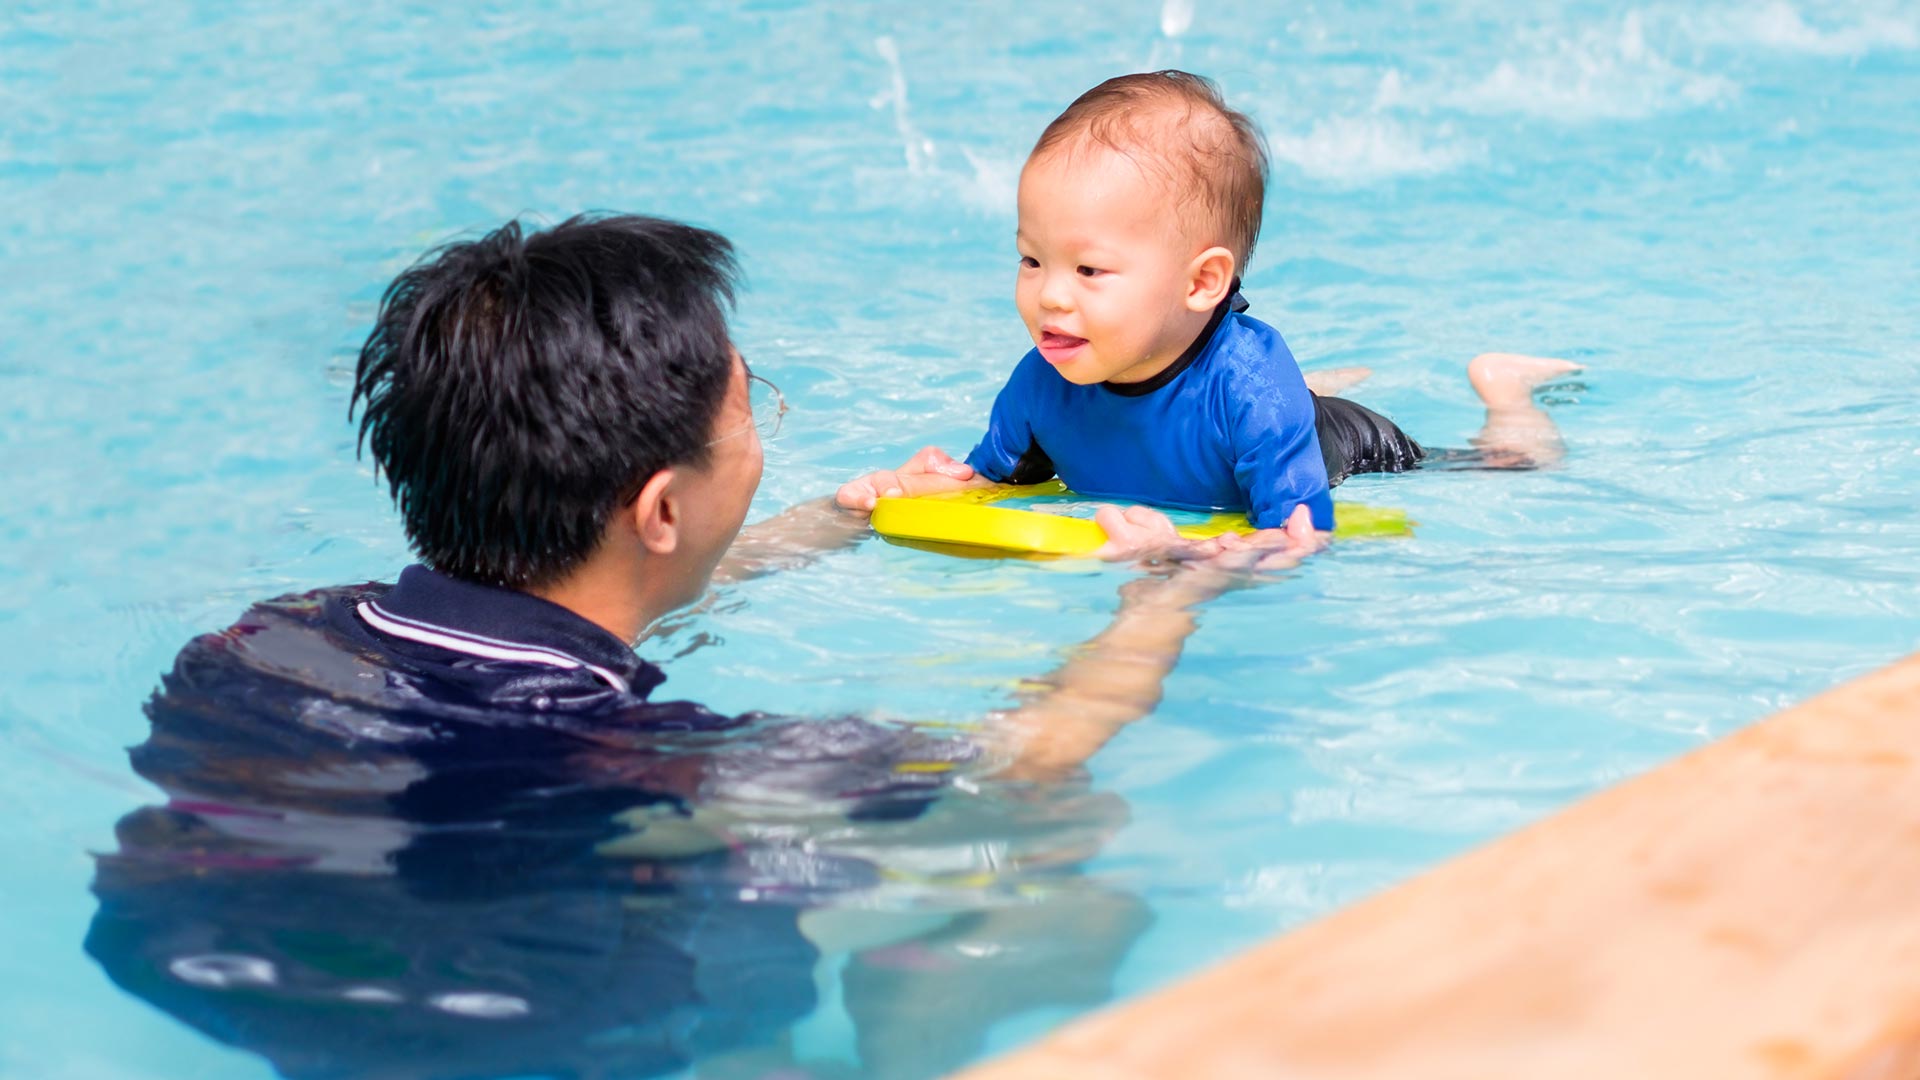 How Soon Should My Child Start Swimming Lessons?